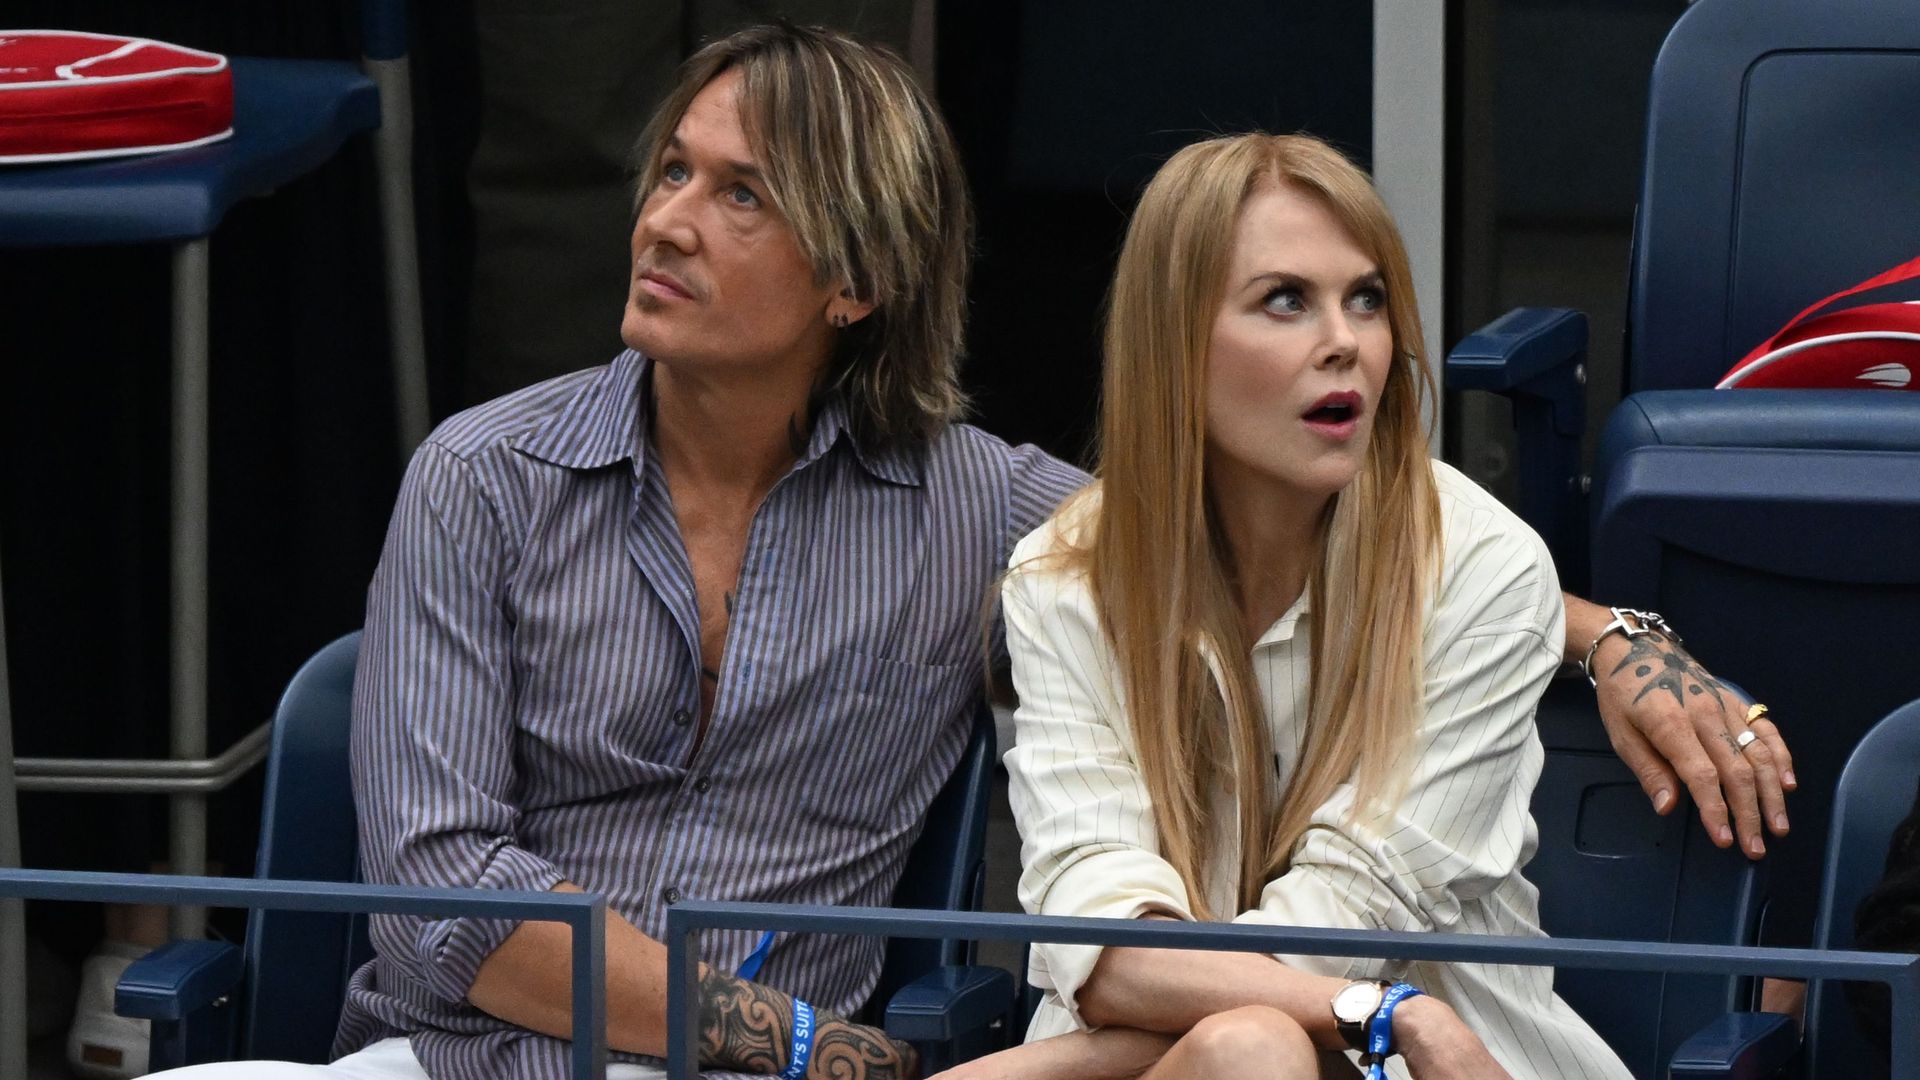 Nicole Kidman and Keith Urban looking in opposite directions